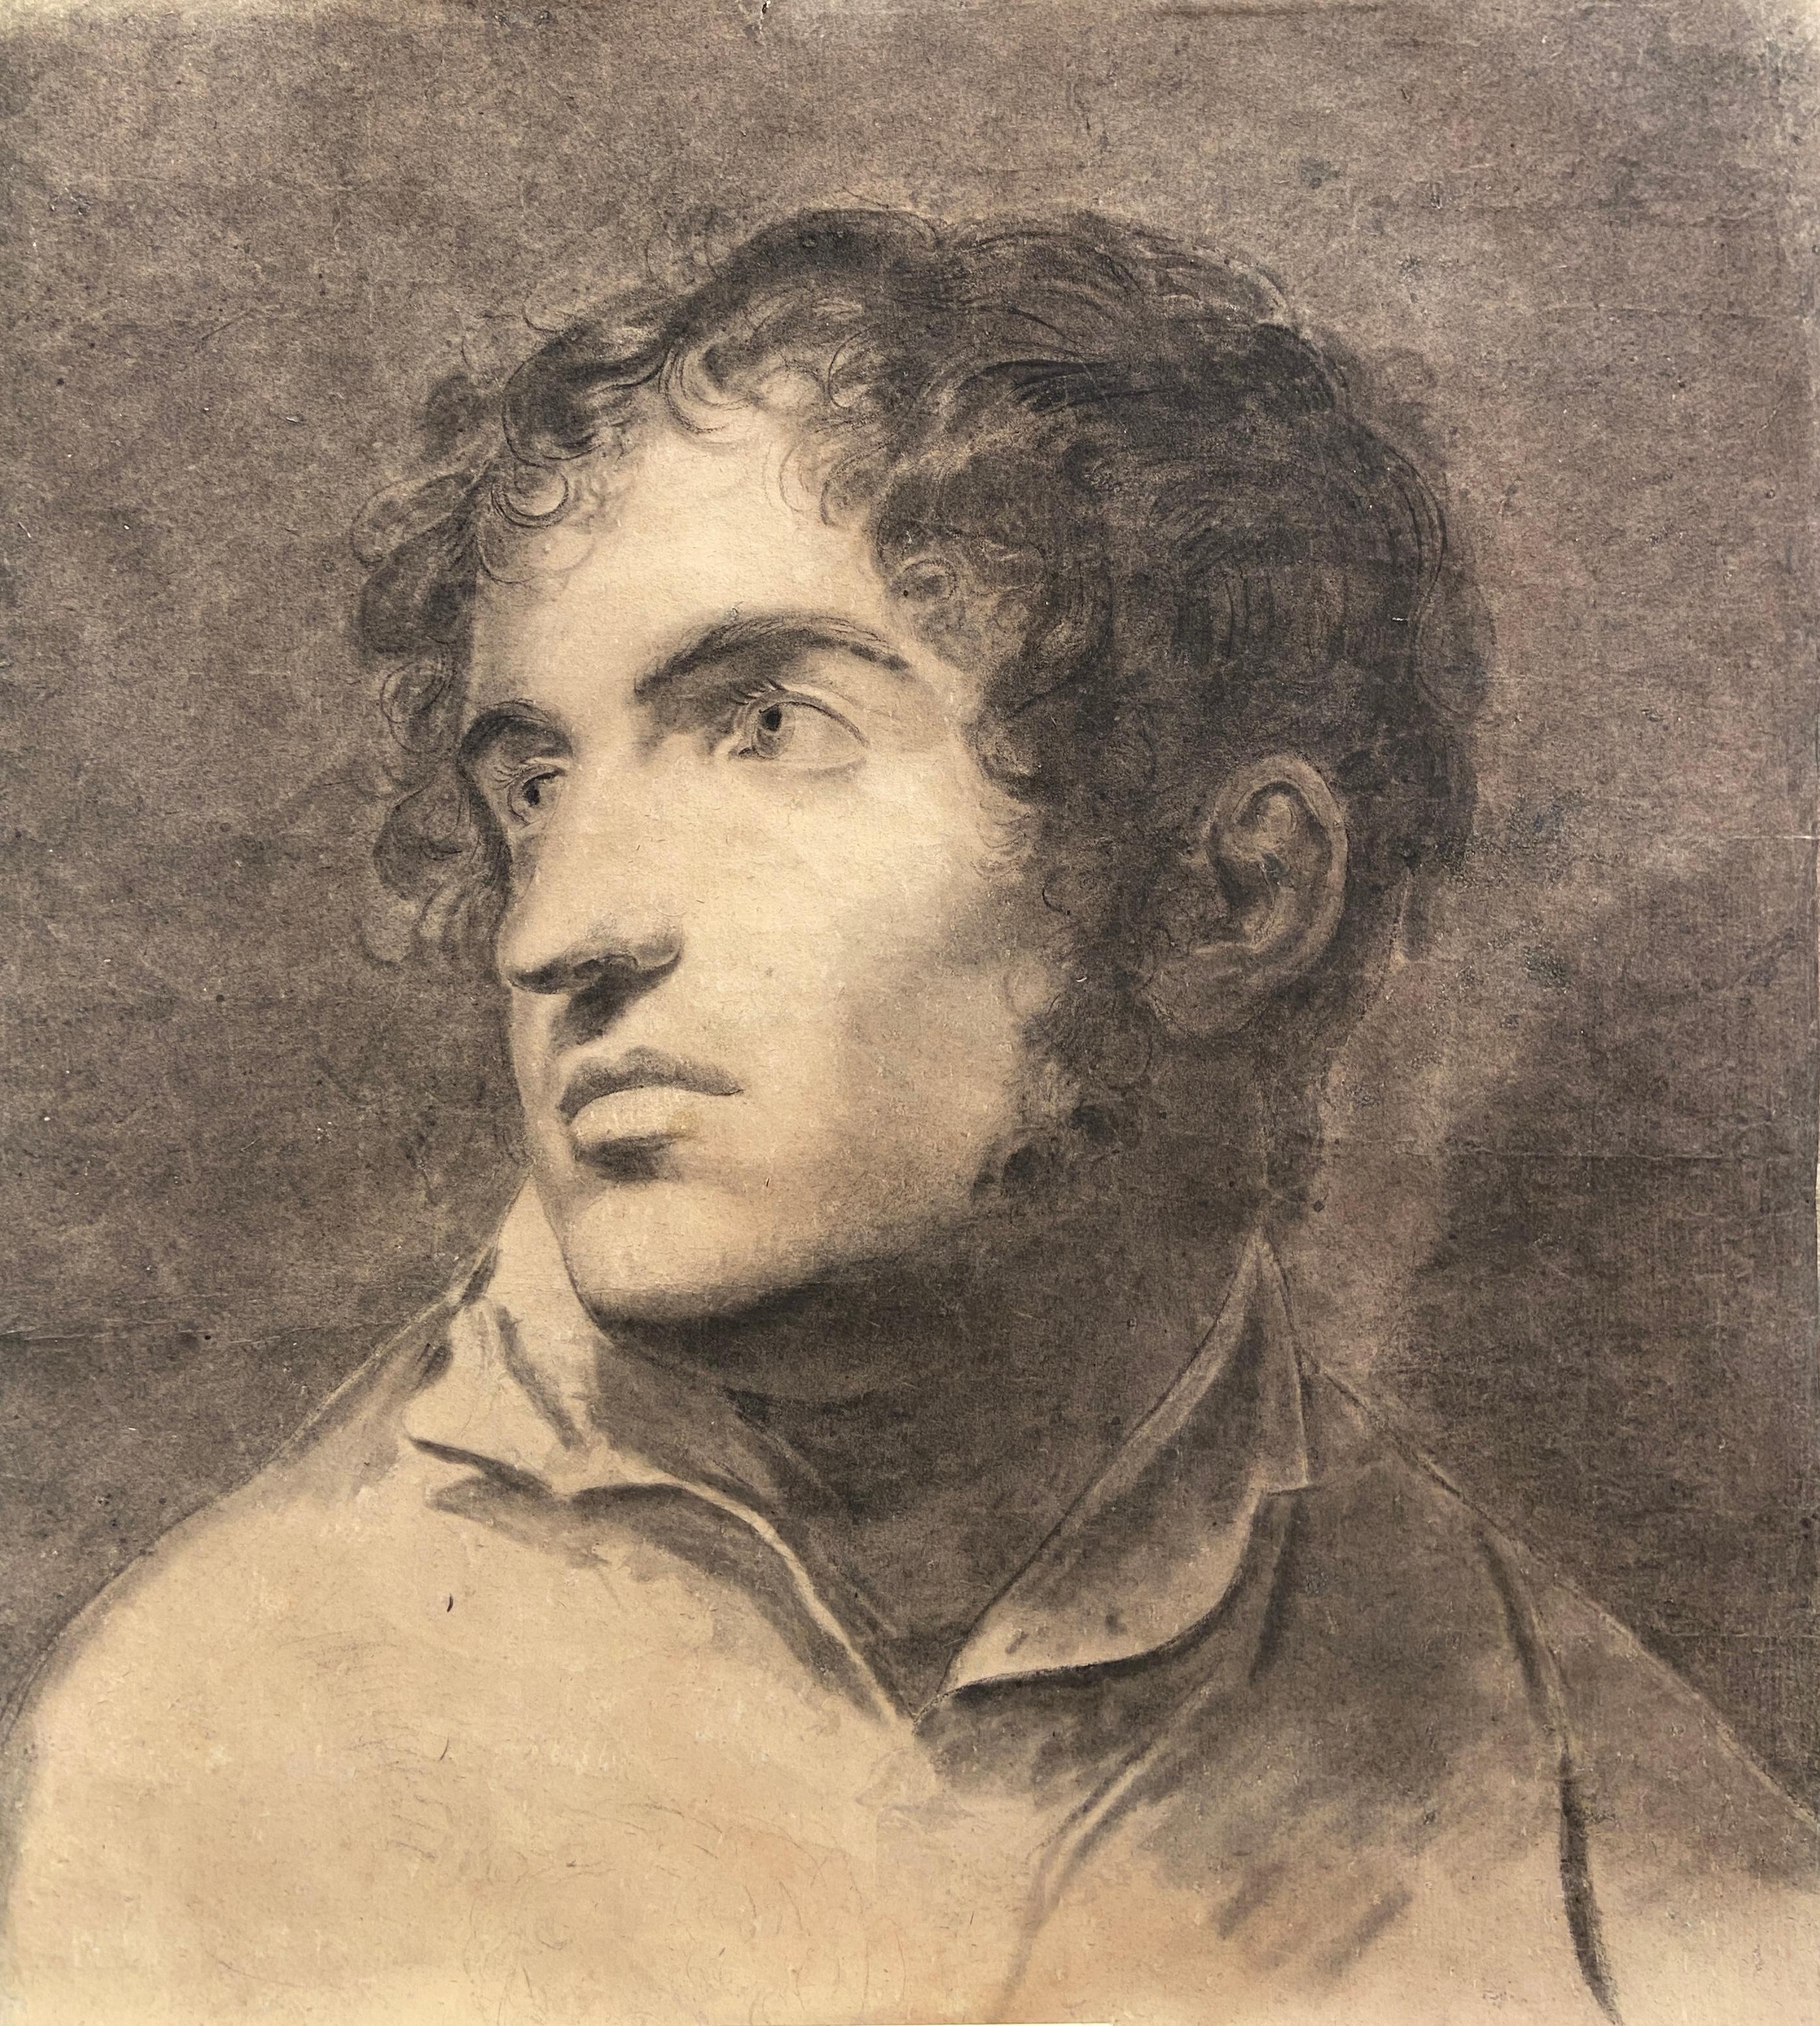 Charcoal and grey wash on paper
Image size: 14 3/4 x 13 3/4 inches (37.5 x 36 cm)

Provenance
Private collection, Washington DC.
C.G. Sloan & Co., Sept. 1980.

This charcoal portrait depicts a young gentleman with plentiful curly hair and wearing an